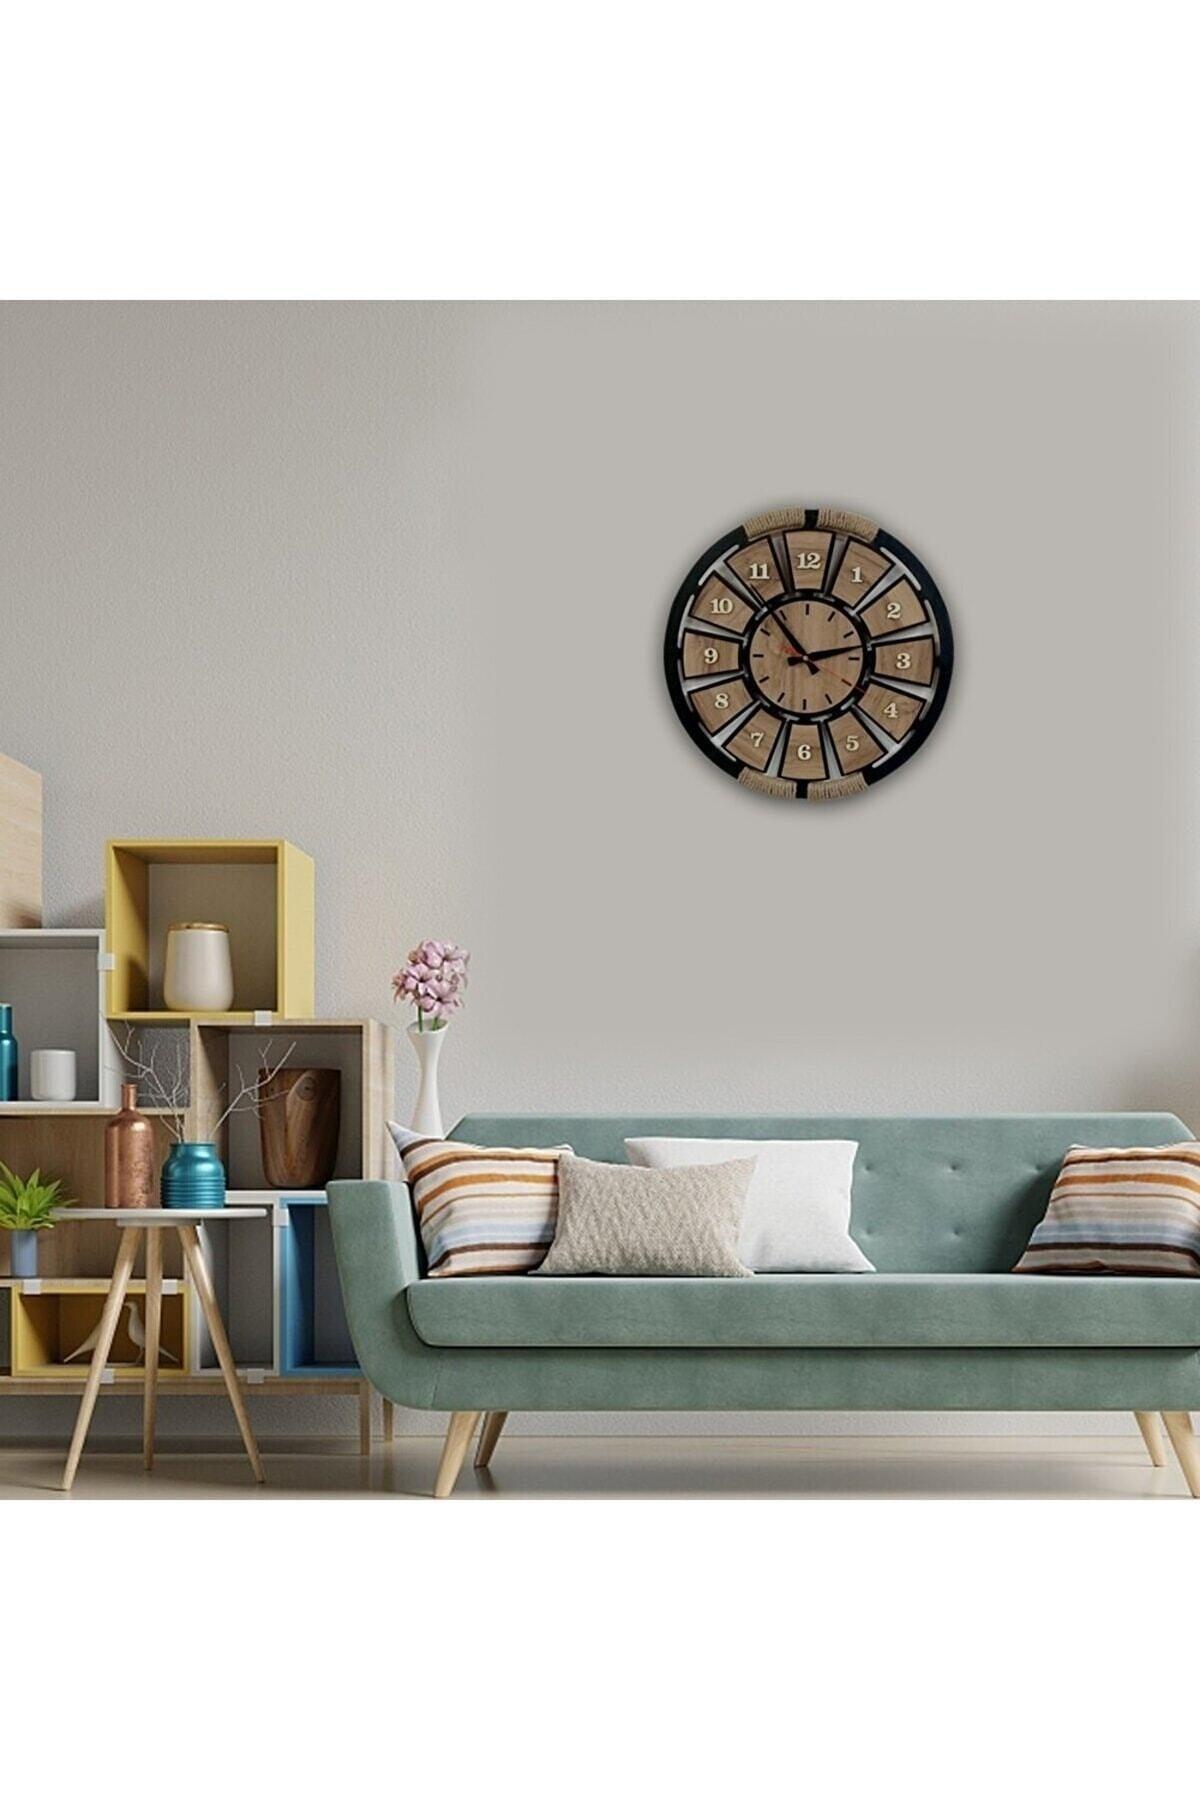 Decorative Analog Wall Clock with Wooden Rope - Swordslife